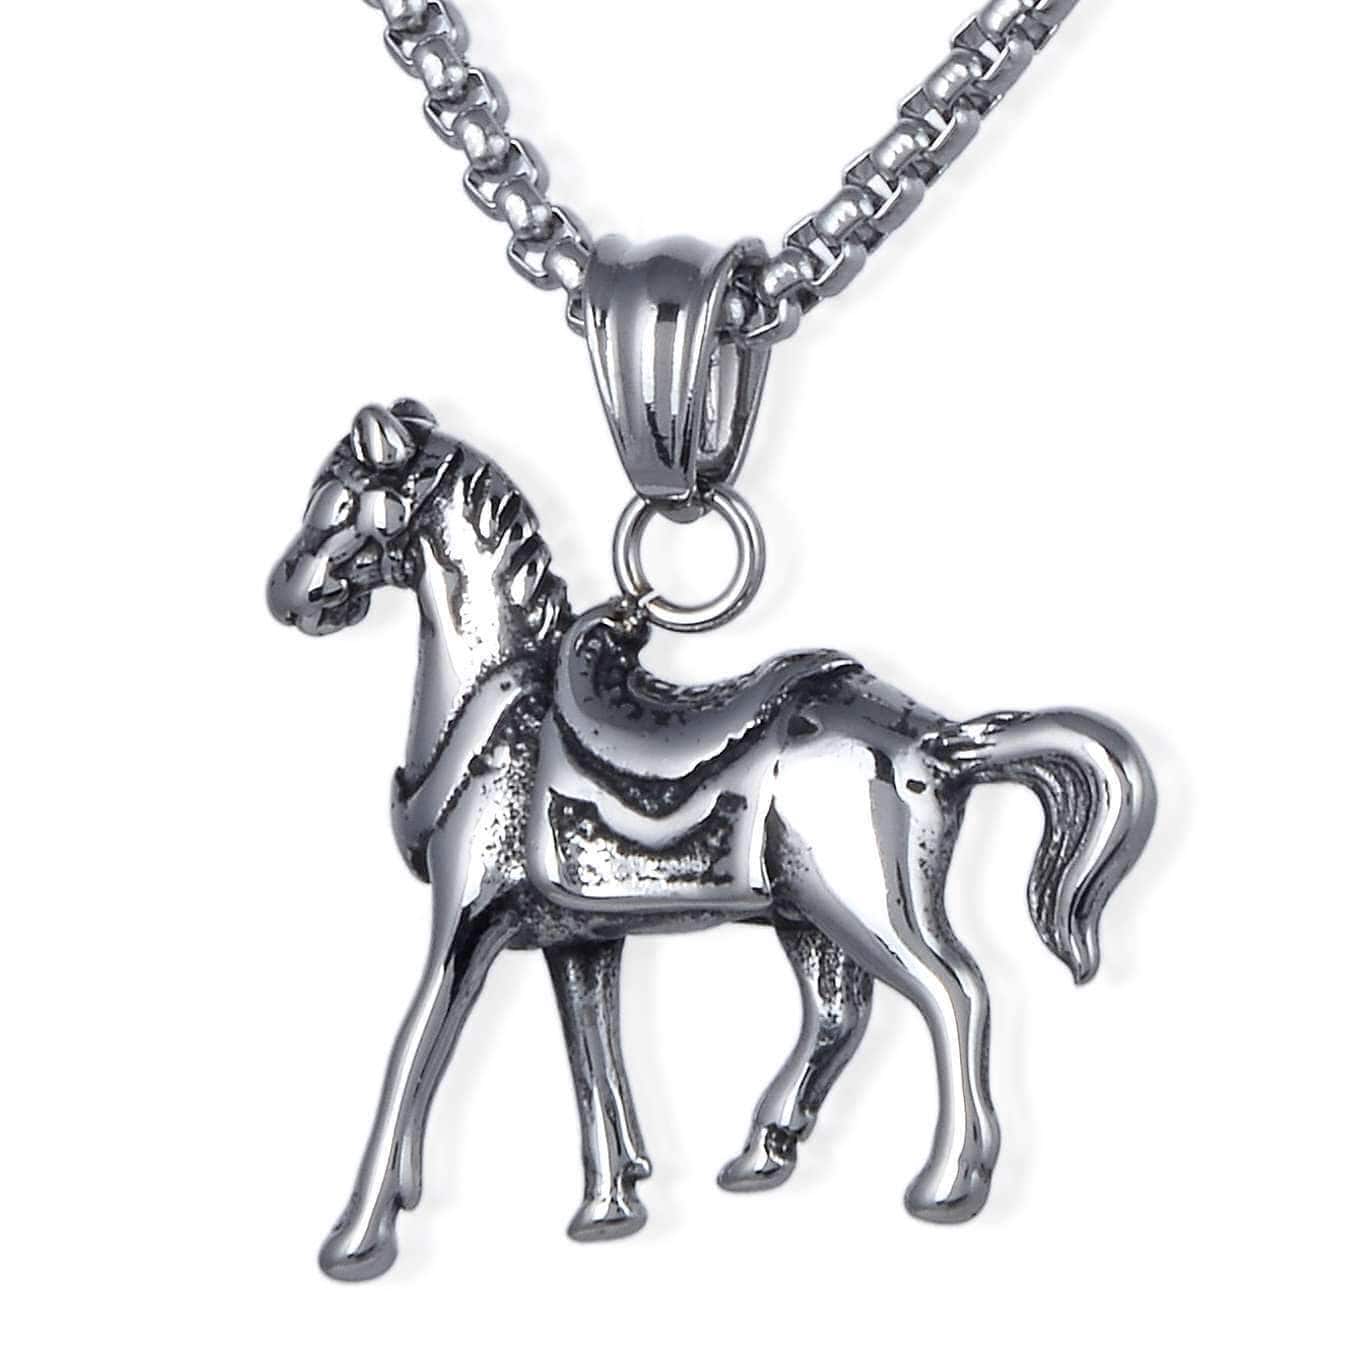 Kalifano Steel Hearts Jewelry Steel Hearts Horse Saddle Necklace SHN120-78